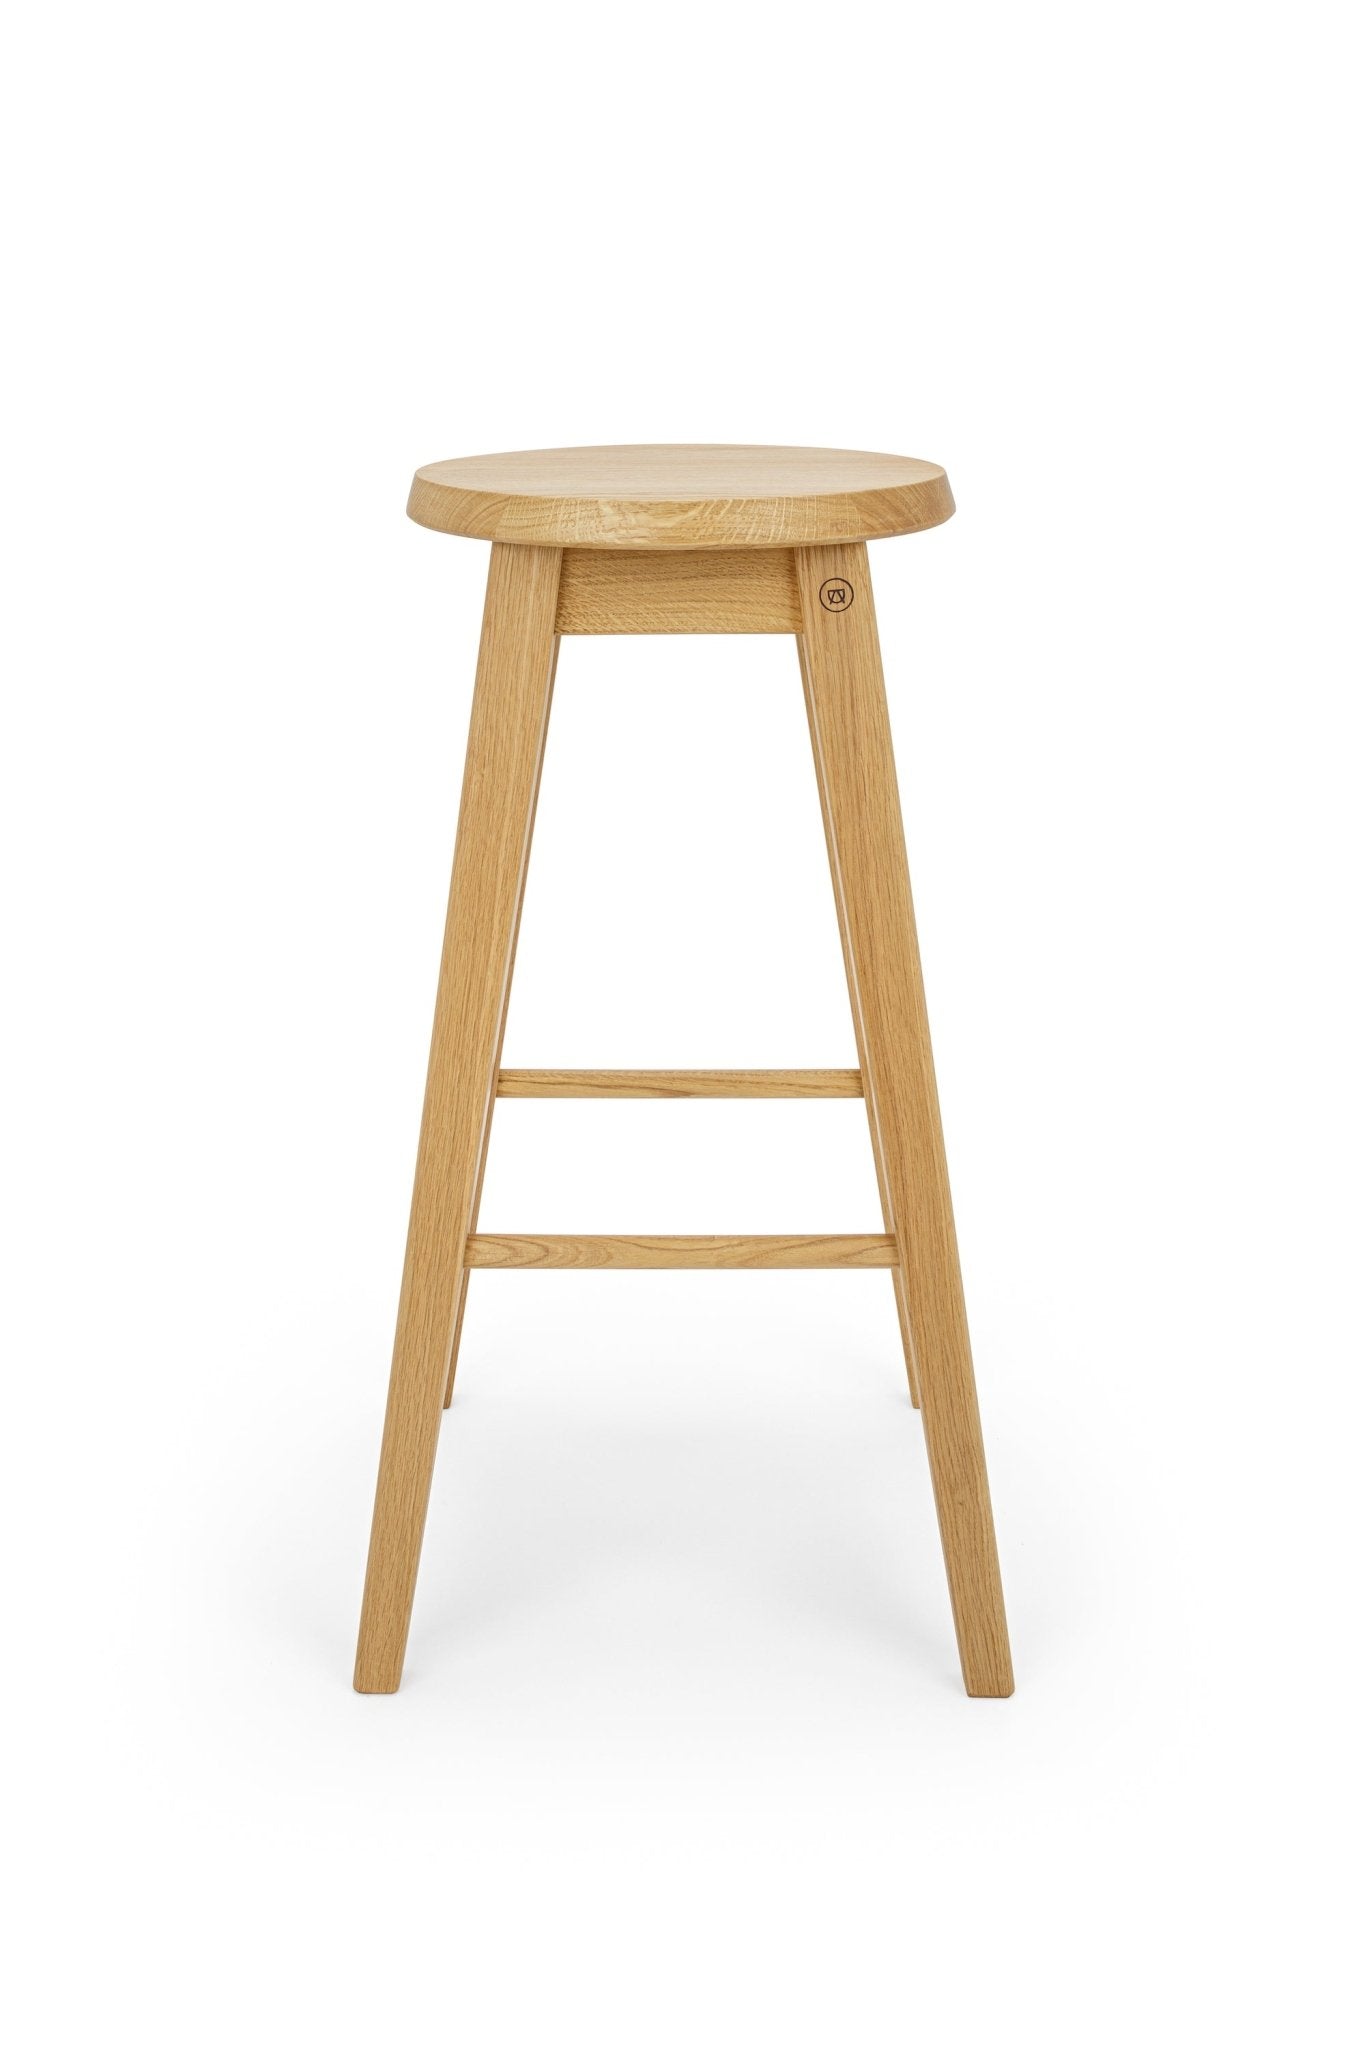 Stable bar stool “Josef” made of oak wood with a honey look